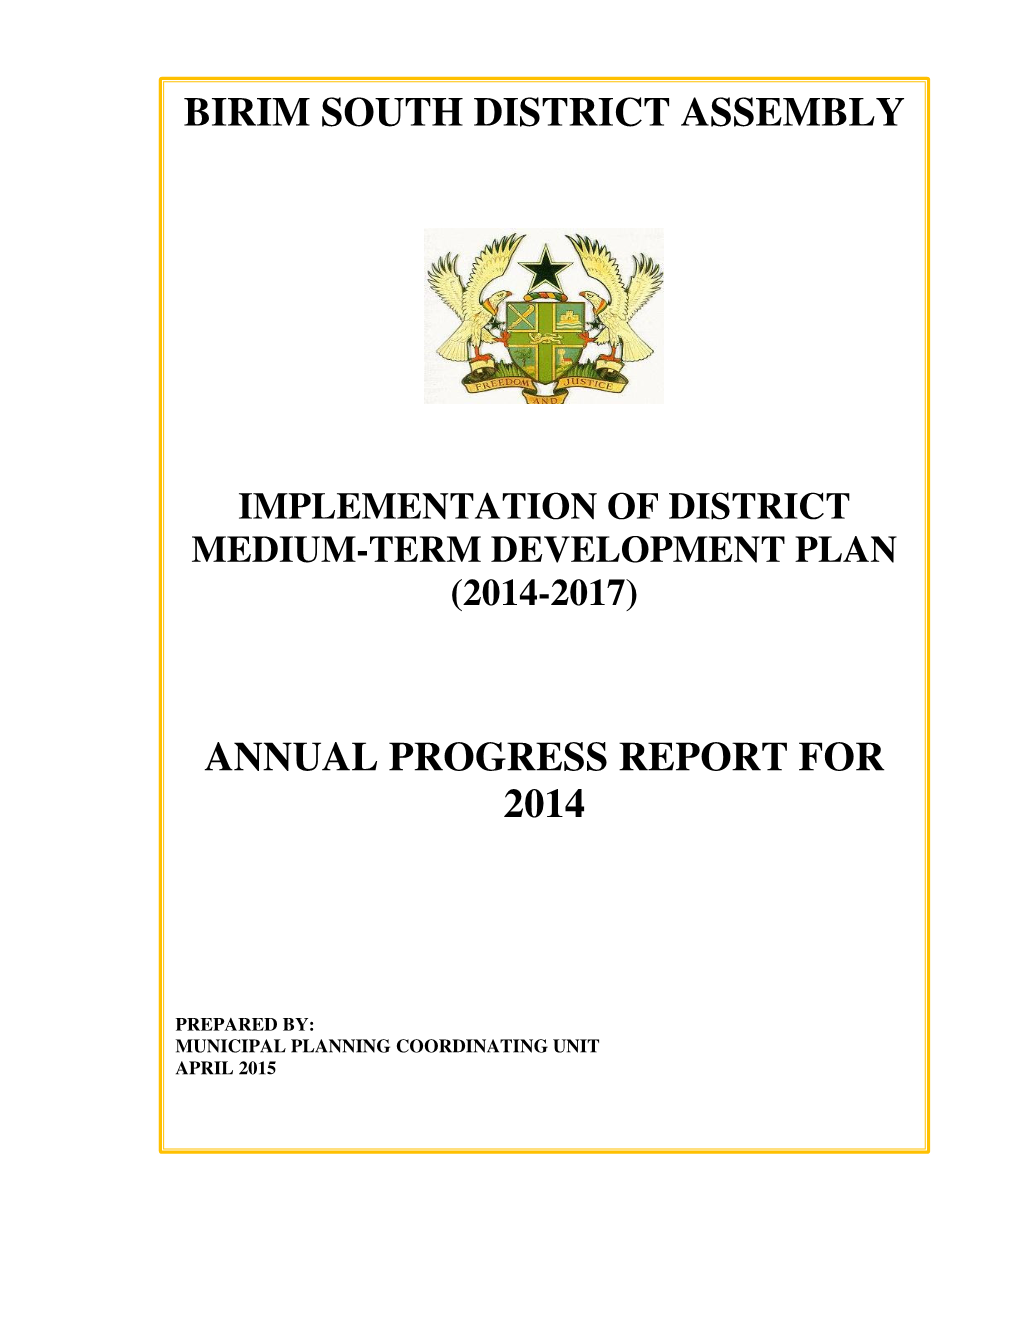 Birim South District Assembly Annual Progress Report